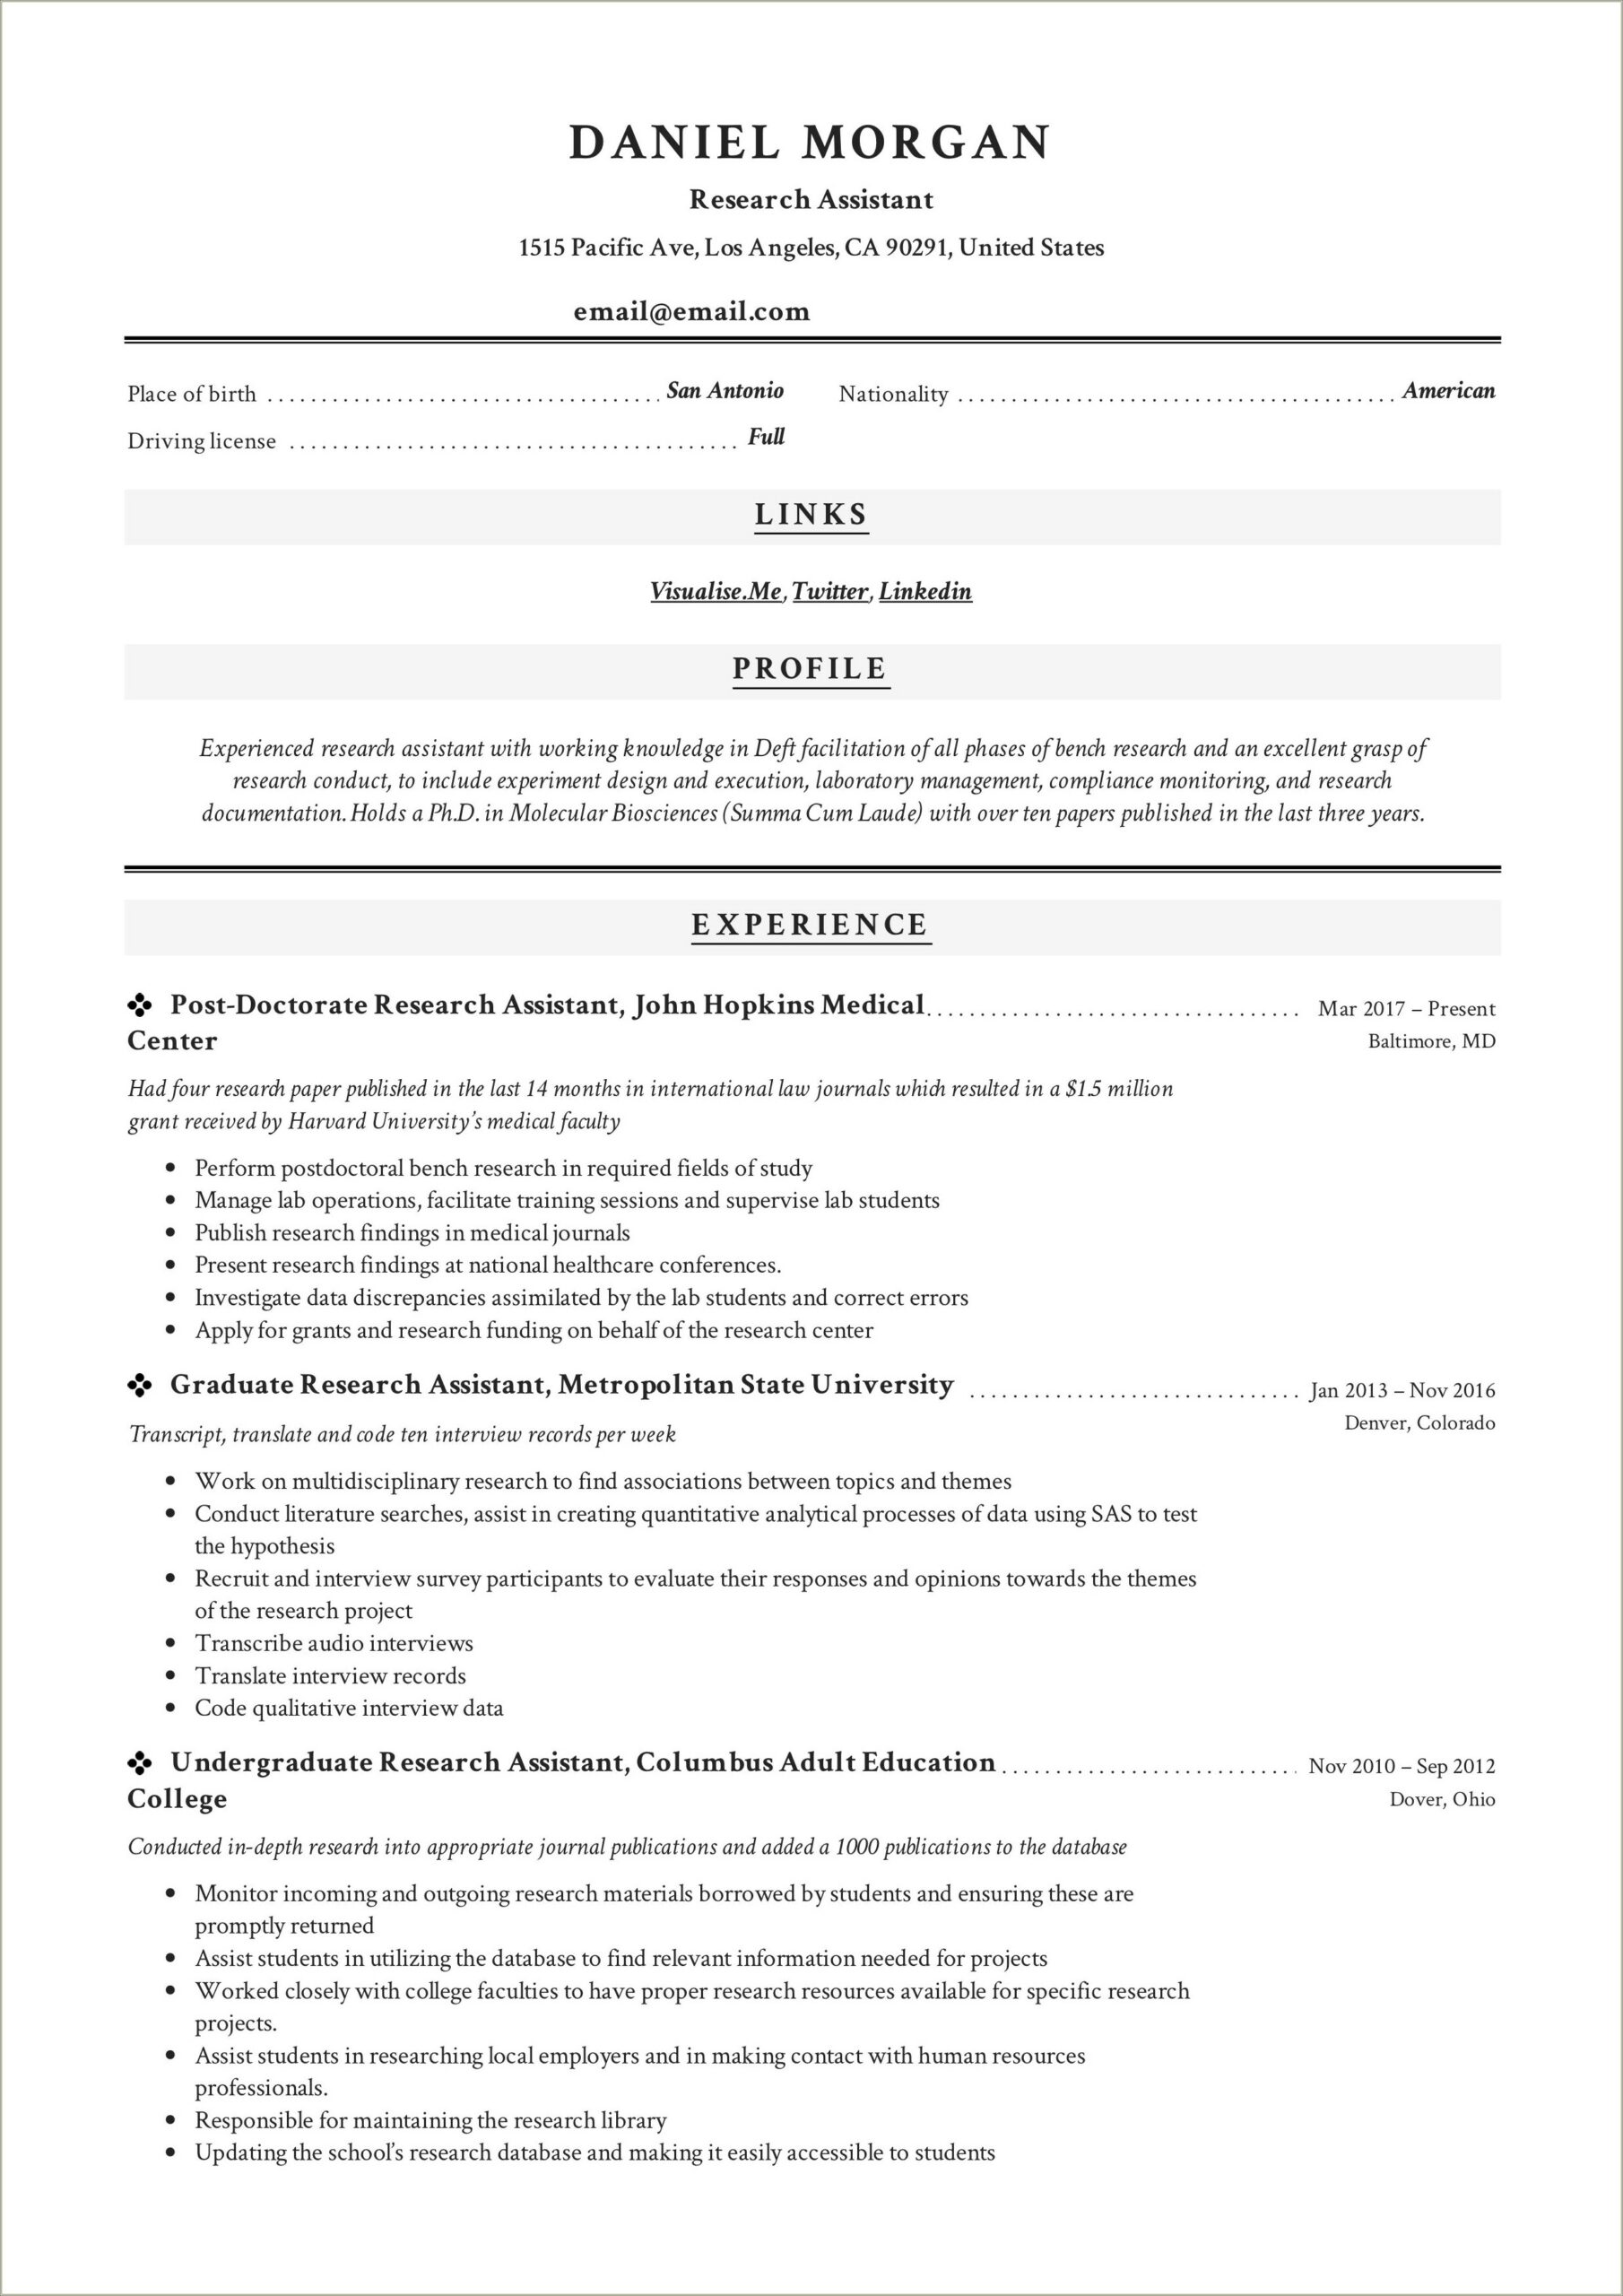 Can You Put Graduate Assistantship On Resume